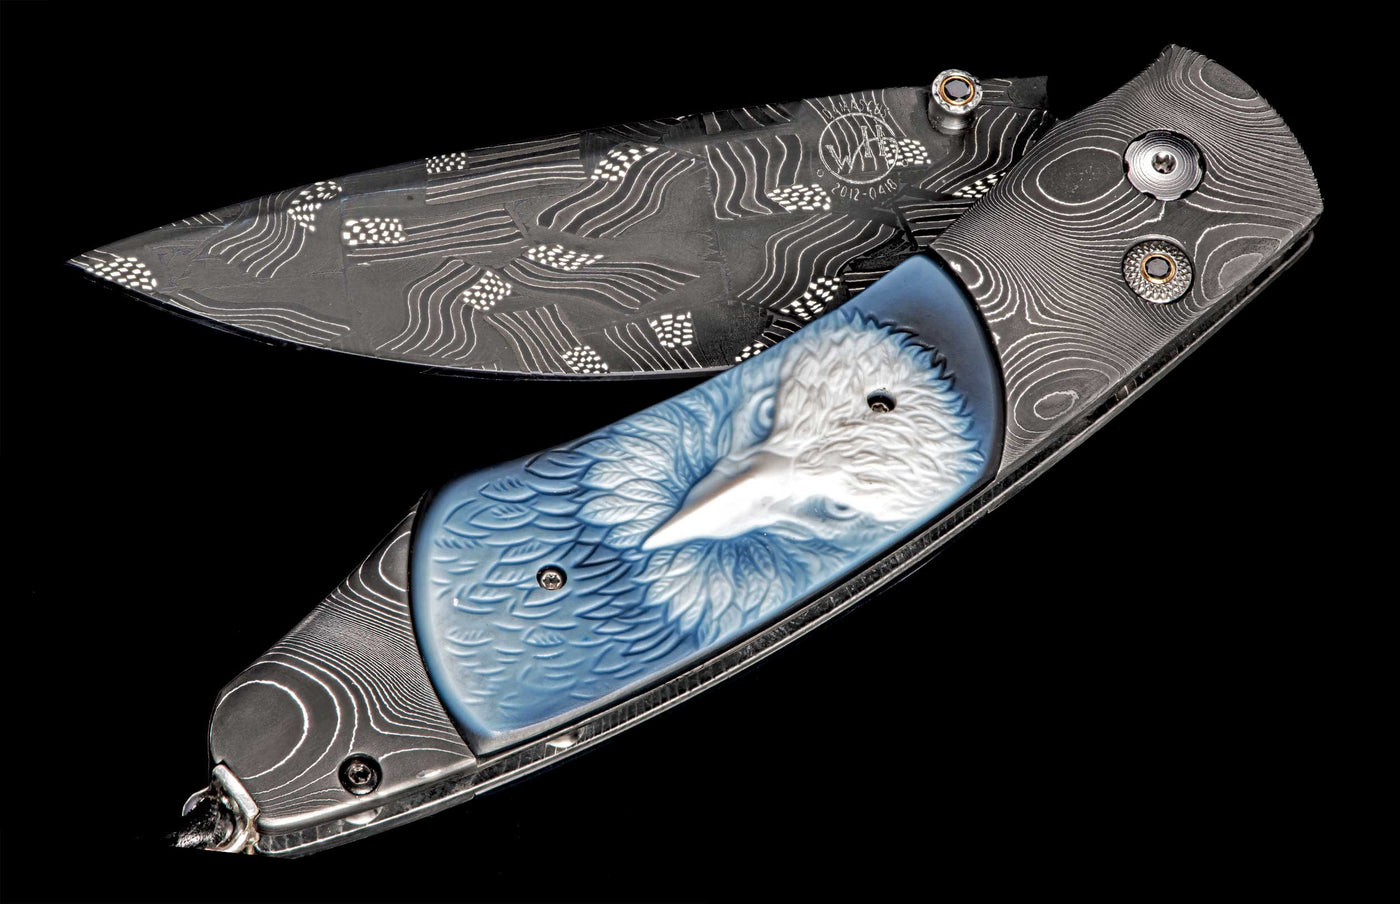 William Henry "DIGNITY" Banded Agate with "FLAG' Damascus Steel Blade